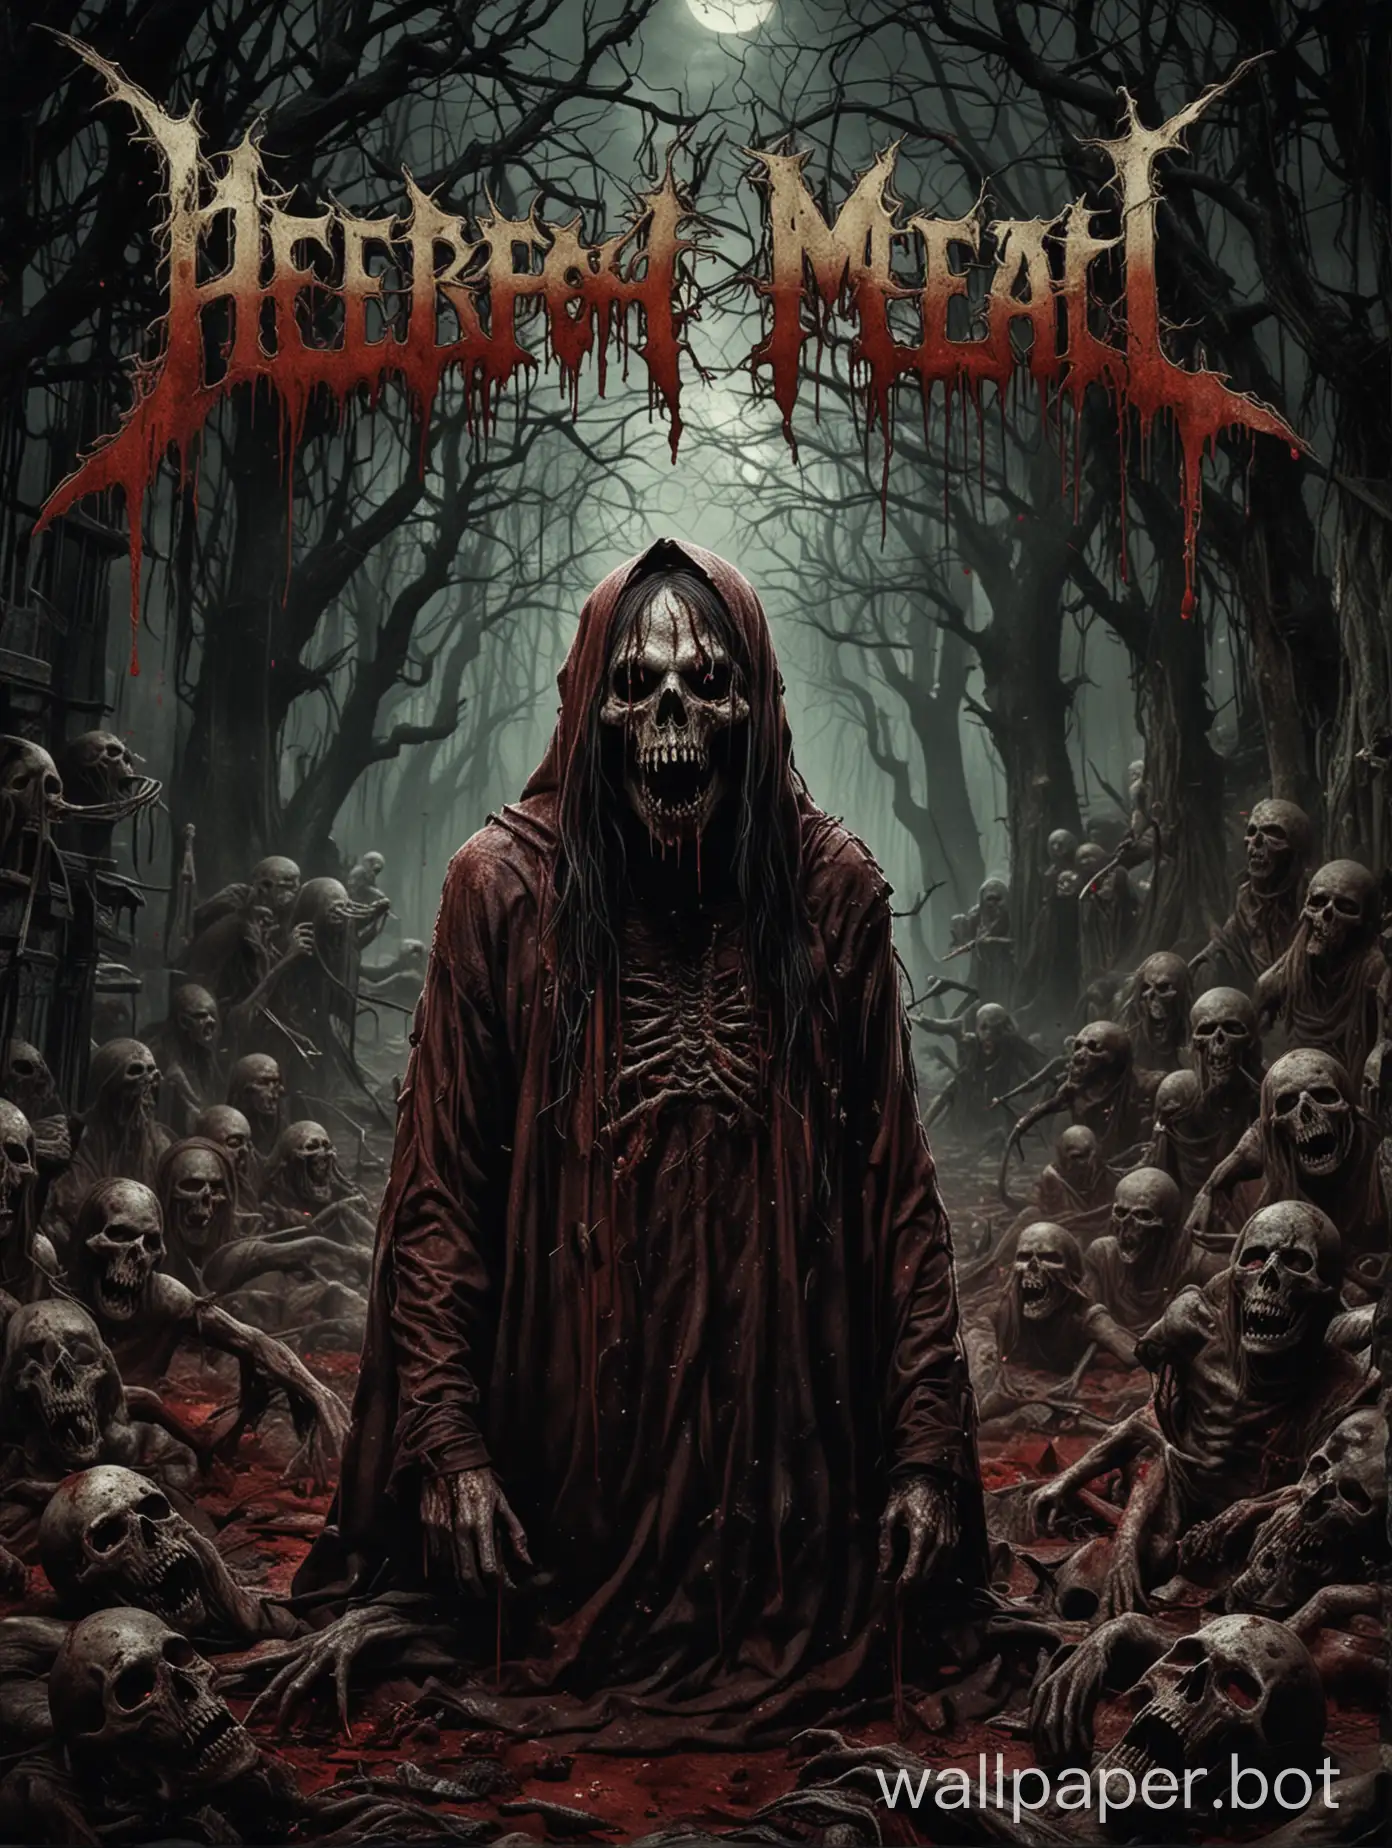 Design a chilling death metal cover that delves into the darkest corners of horror. Depict a haunting scene of a decaying and blood-drenched corpse Utilize dark and intense colors like deep blacks, vibrant reds, and eerie greens to create a menacing atmosphere. Include rugged and distorted typography to incorporate the band name and album title, adding to the overall macabre appeal. Let your imagination go wild and create a visually striking artwork that captures the raw brutality and darkness of death metal